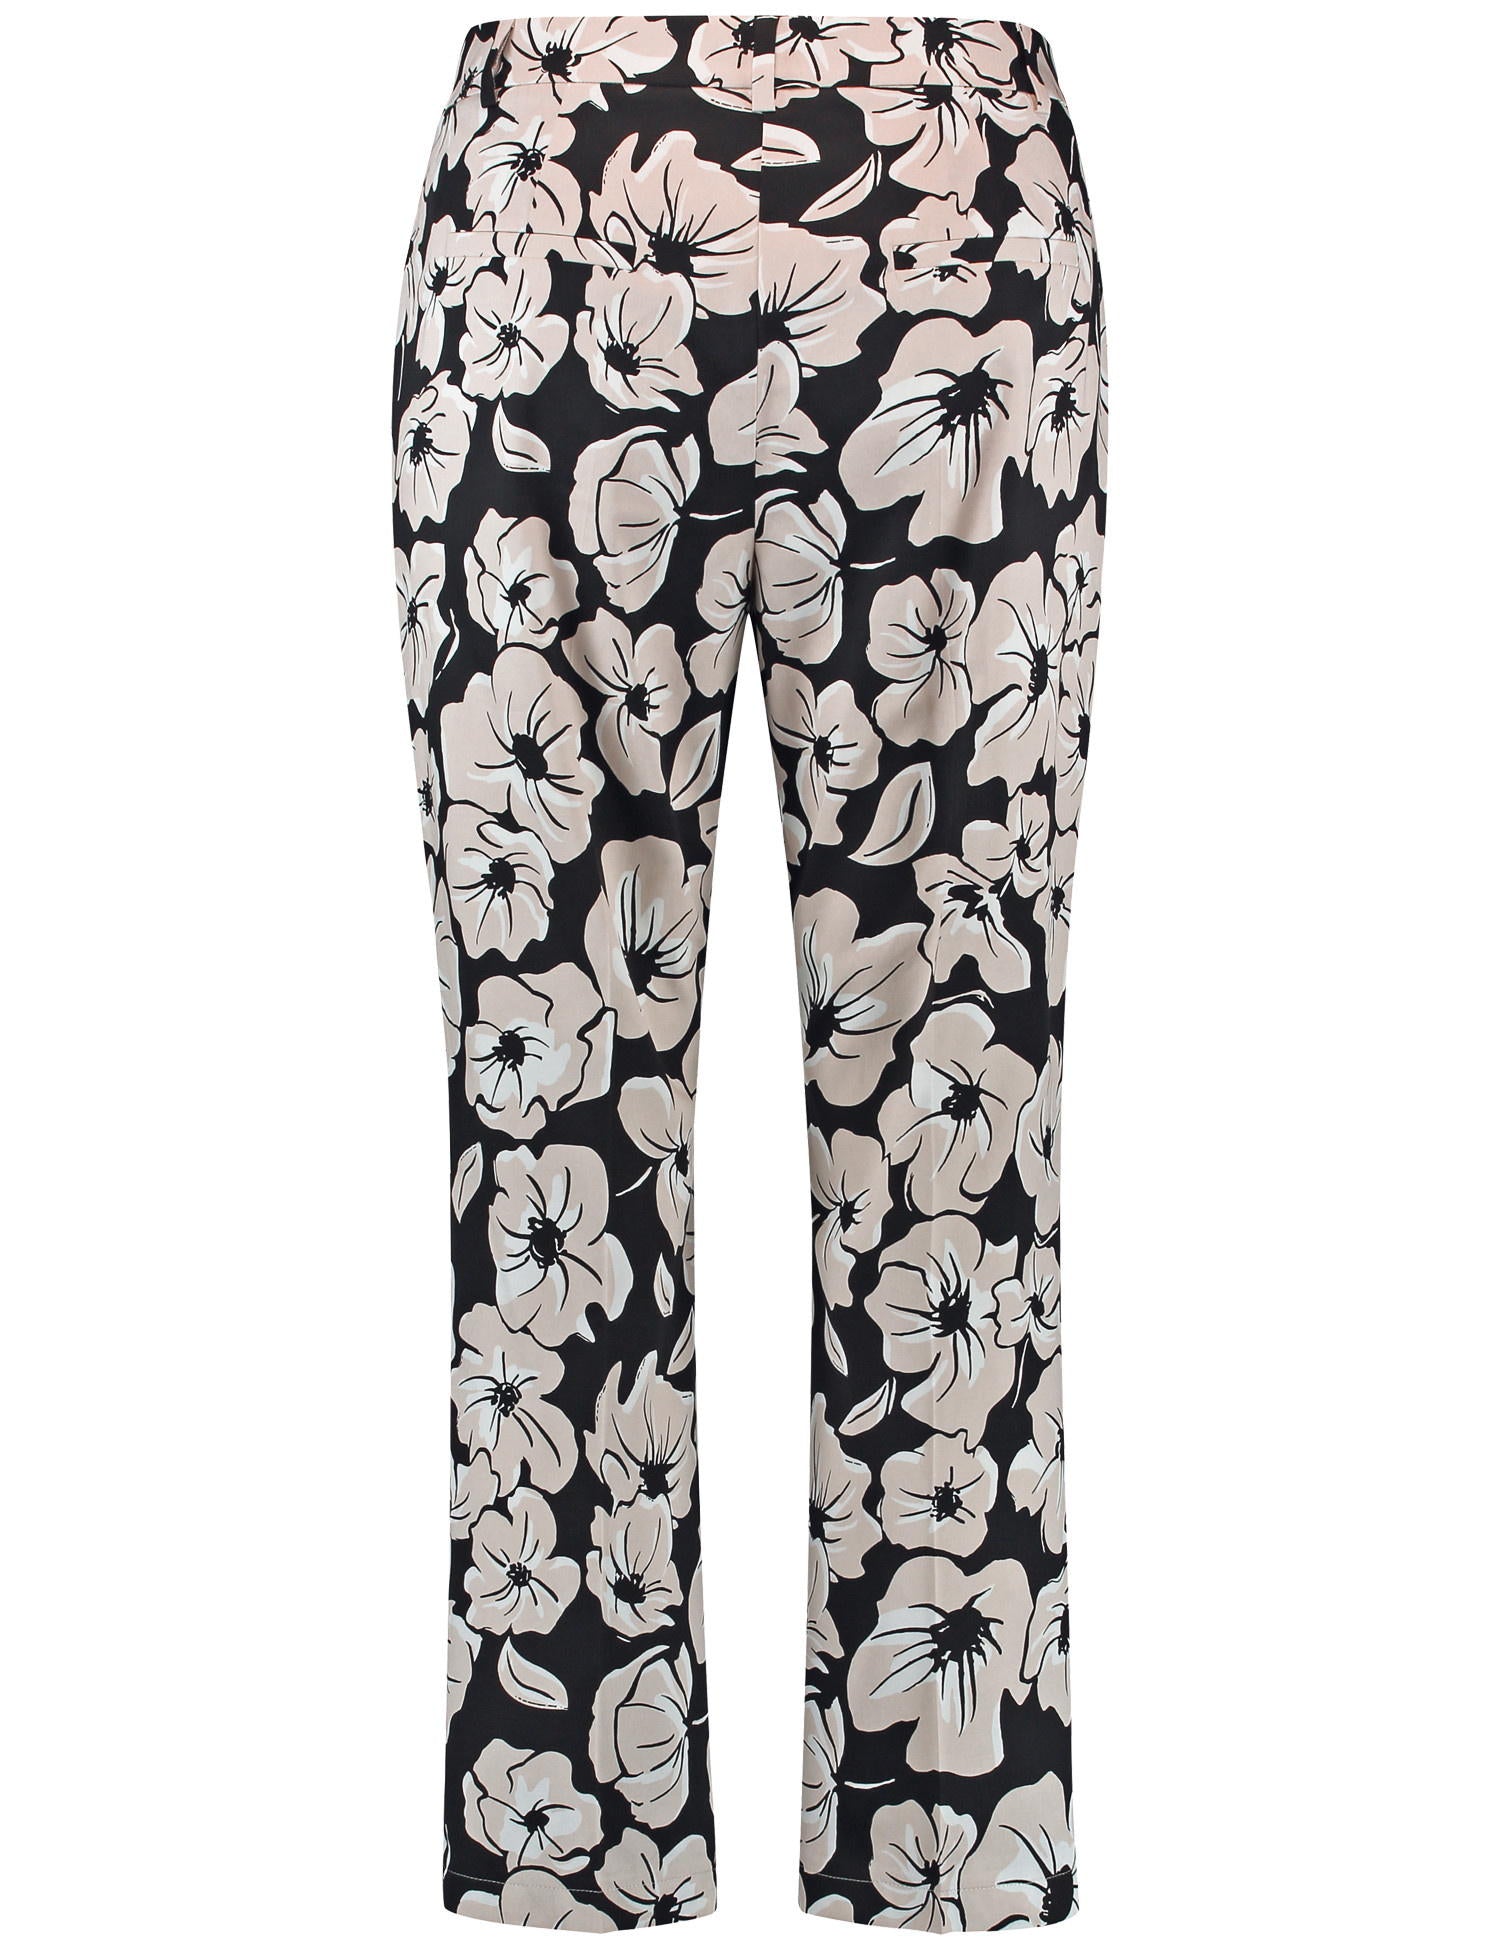 Chinos With A Floral Pattern_320038-31293_1098_03